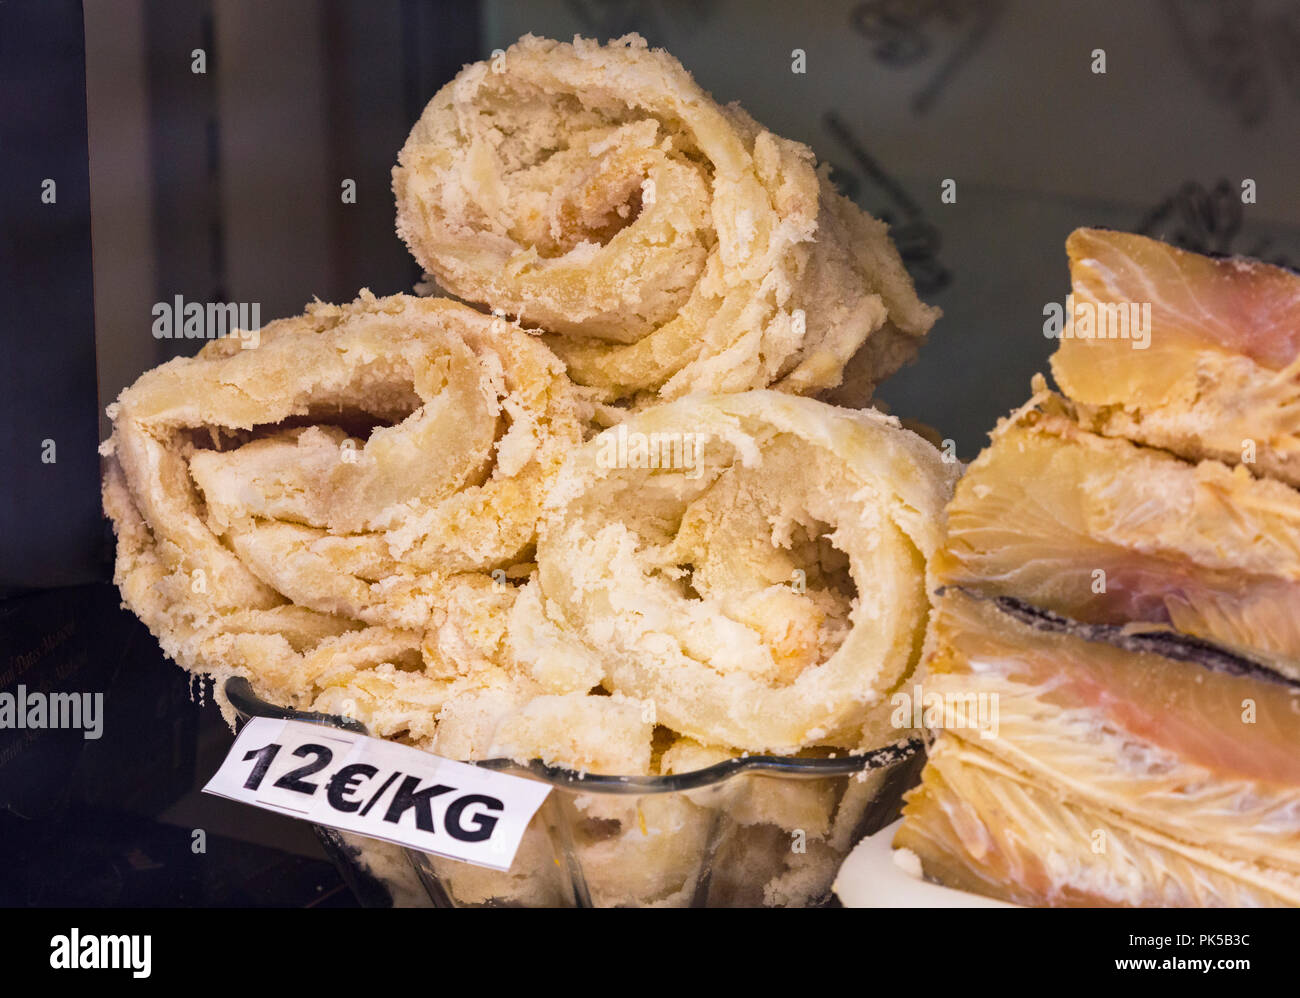 Rolls of dried codfish in Spanish shop window. The salted cod is known as bacalao in Spanish. Stock Photo